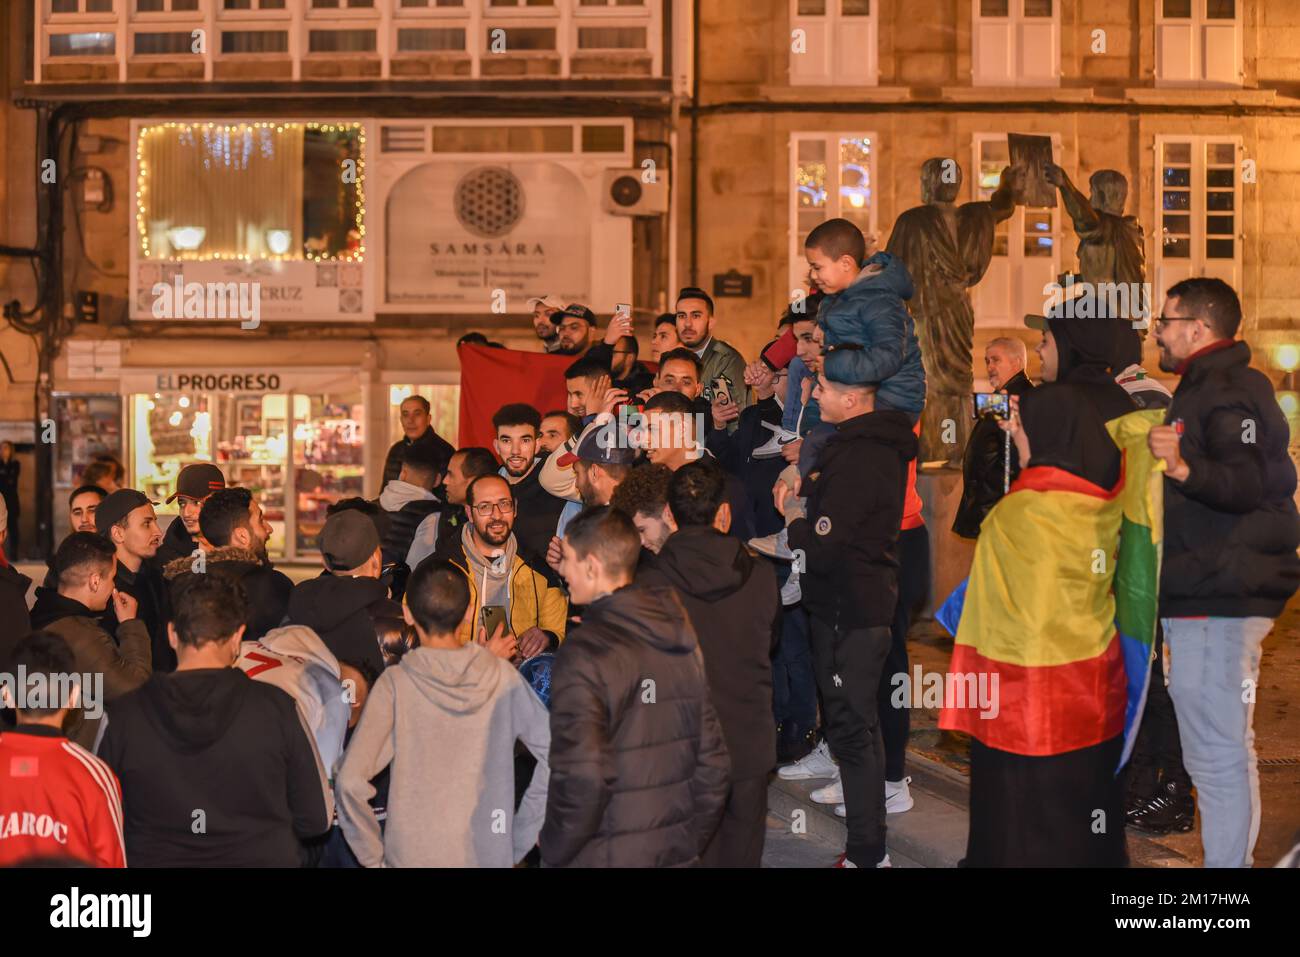 the moroccan people celebrate their victory in the world cup all over spain, in the picture a crowd of people celebrating in the main square of lugo t Stock Photo